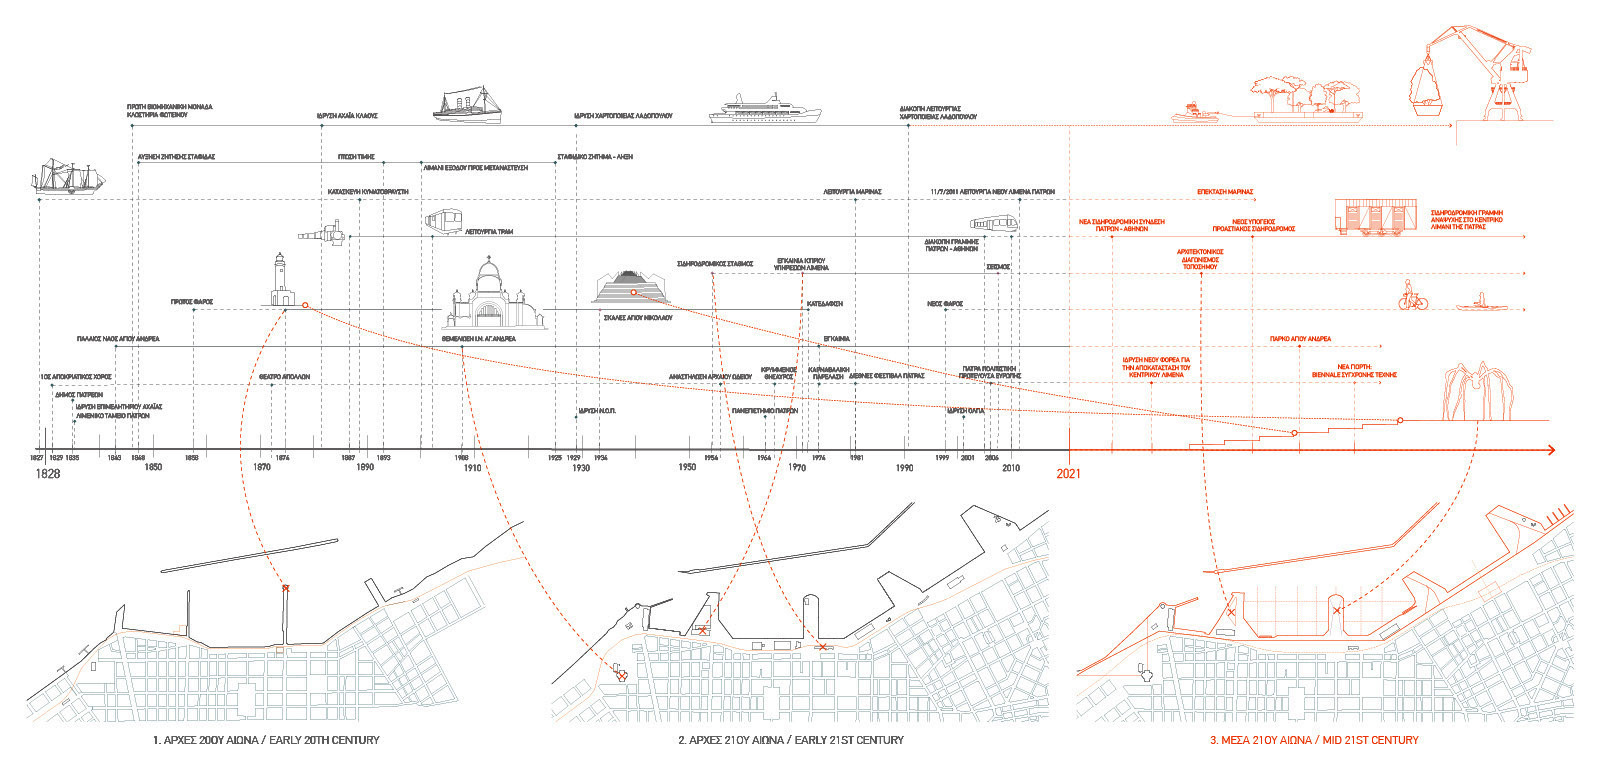 Archisearch Team CC20202020 wins 2nd prize at the architectural competition “Redesign of the Waterfront of Patras”